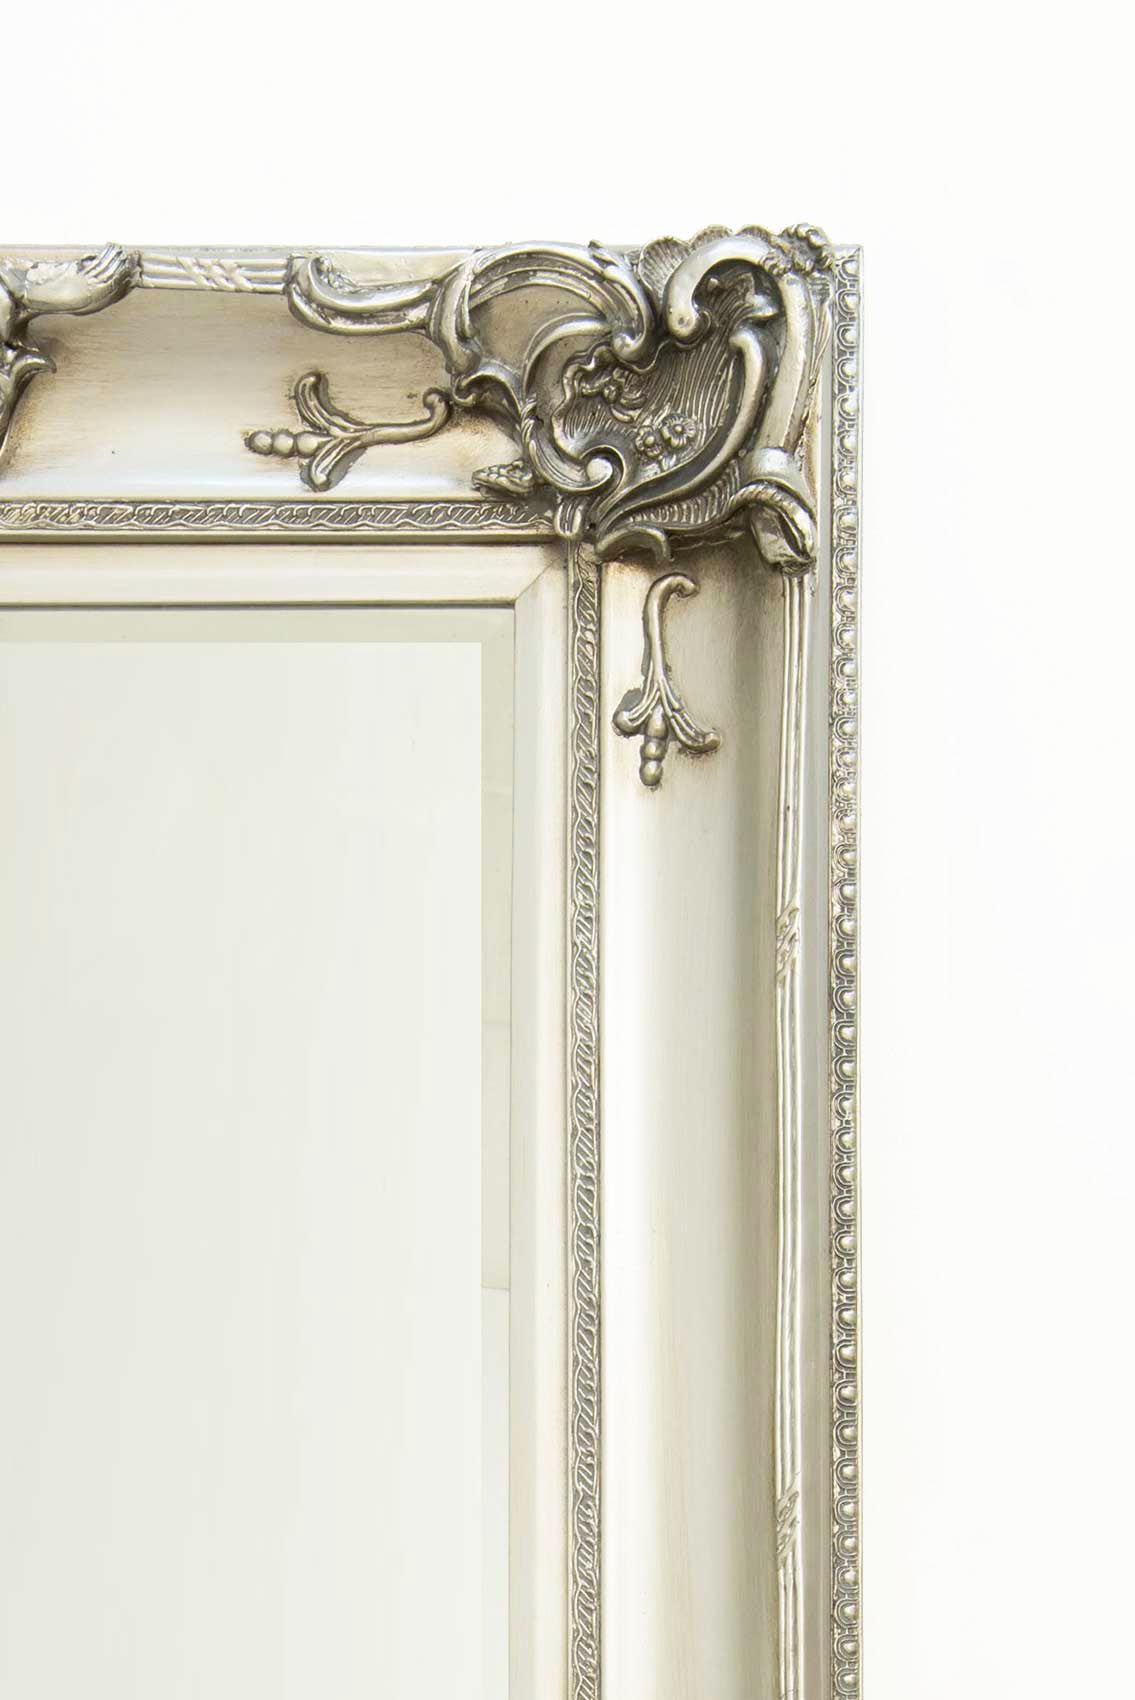 Beautiful Large Silver Decorative Ornate Wall Mirror 6ft X 3ft 183 X Regarding Silver Decorative Wall Mirrors (View 7 of 15)